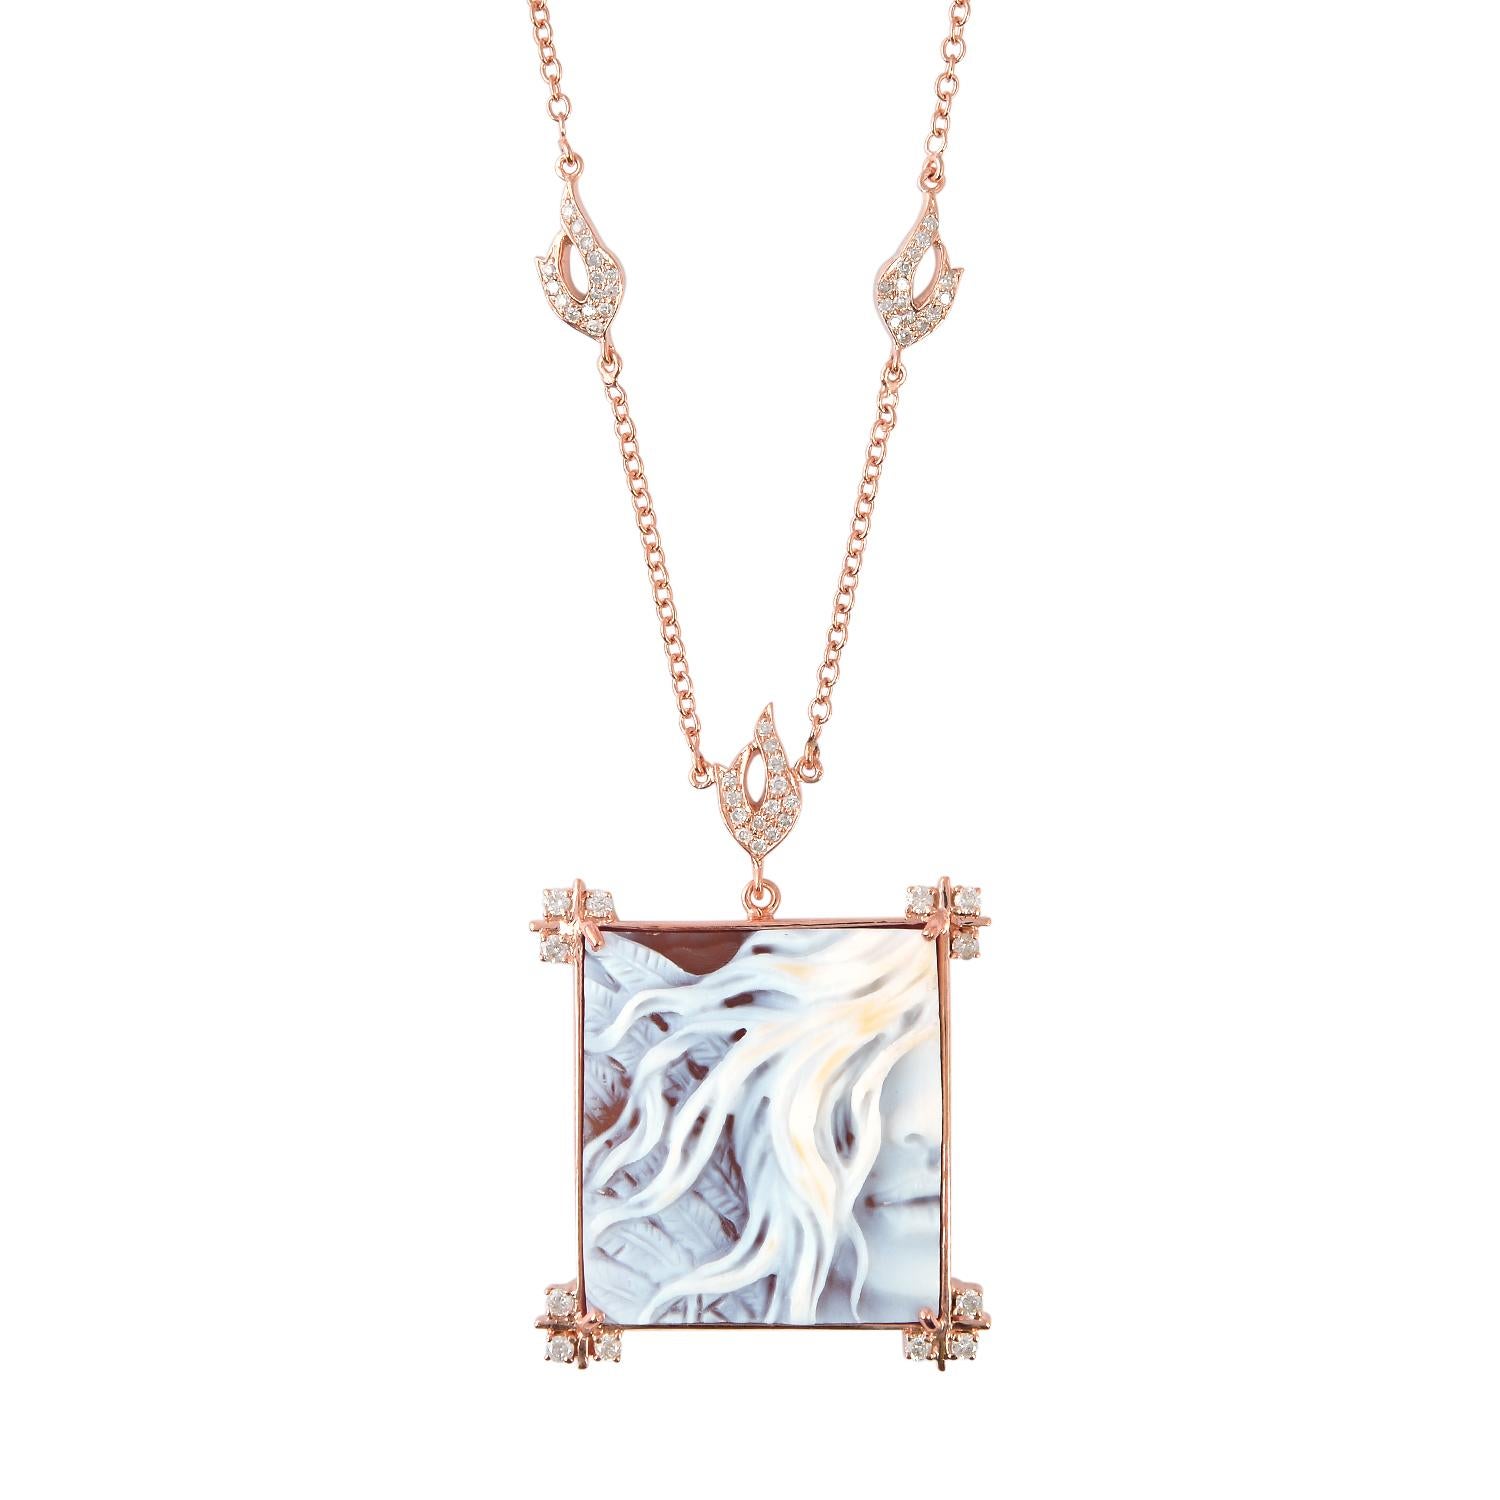 Contemporary 12.60 ct Shell Cameo pendant Necklace With Diamonds Made In 18k Rose Gold For Sale